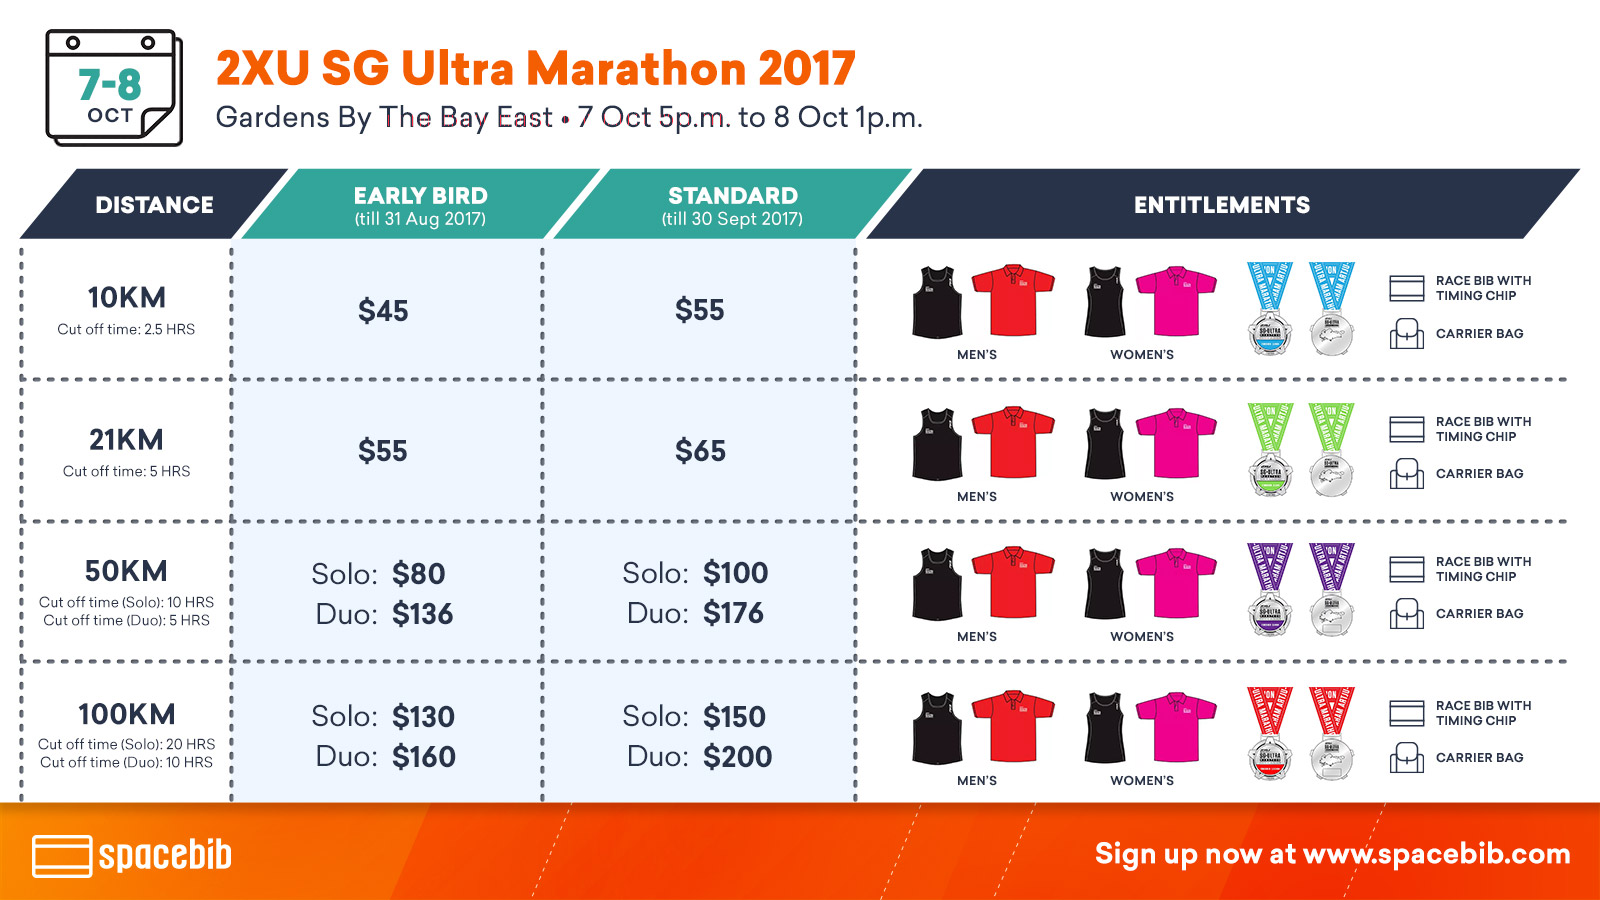 2XU SG Ultra Marathon: Bust Your Biggest Moves Yet!